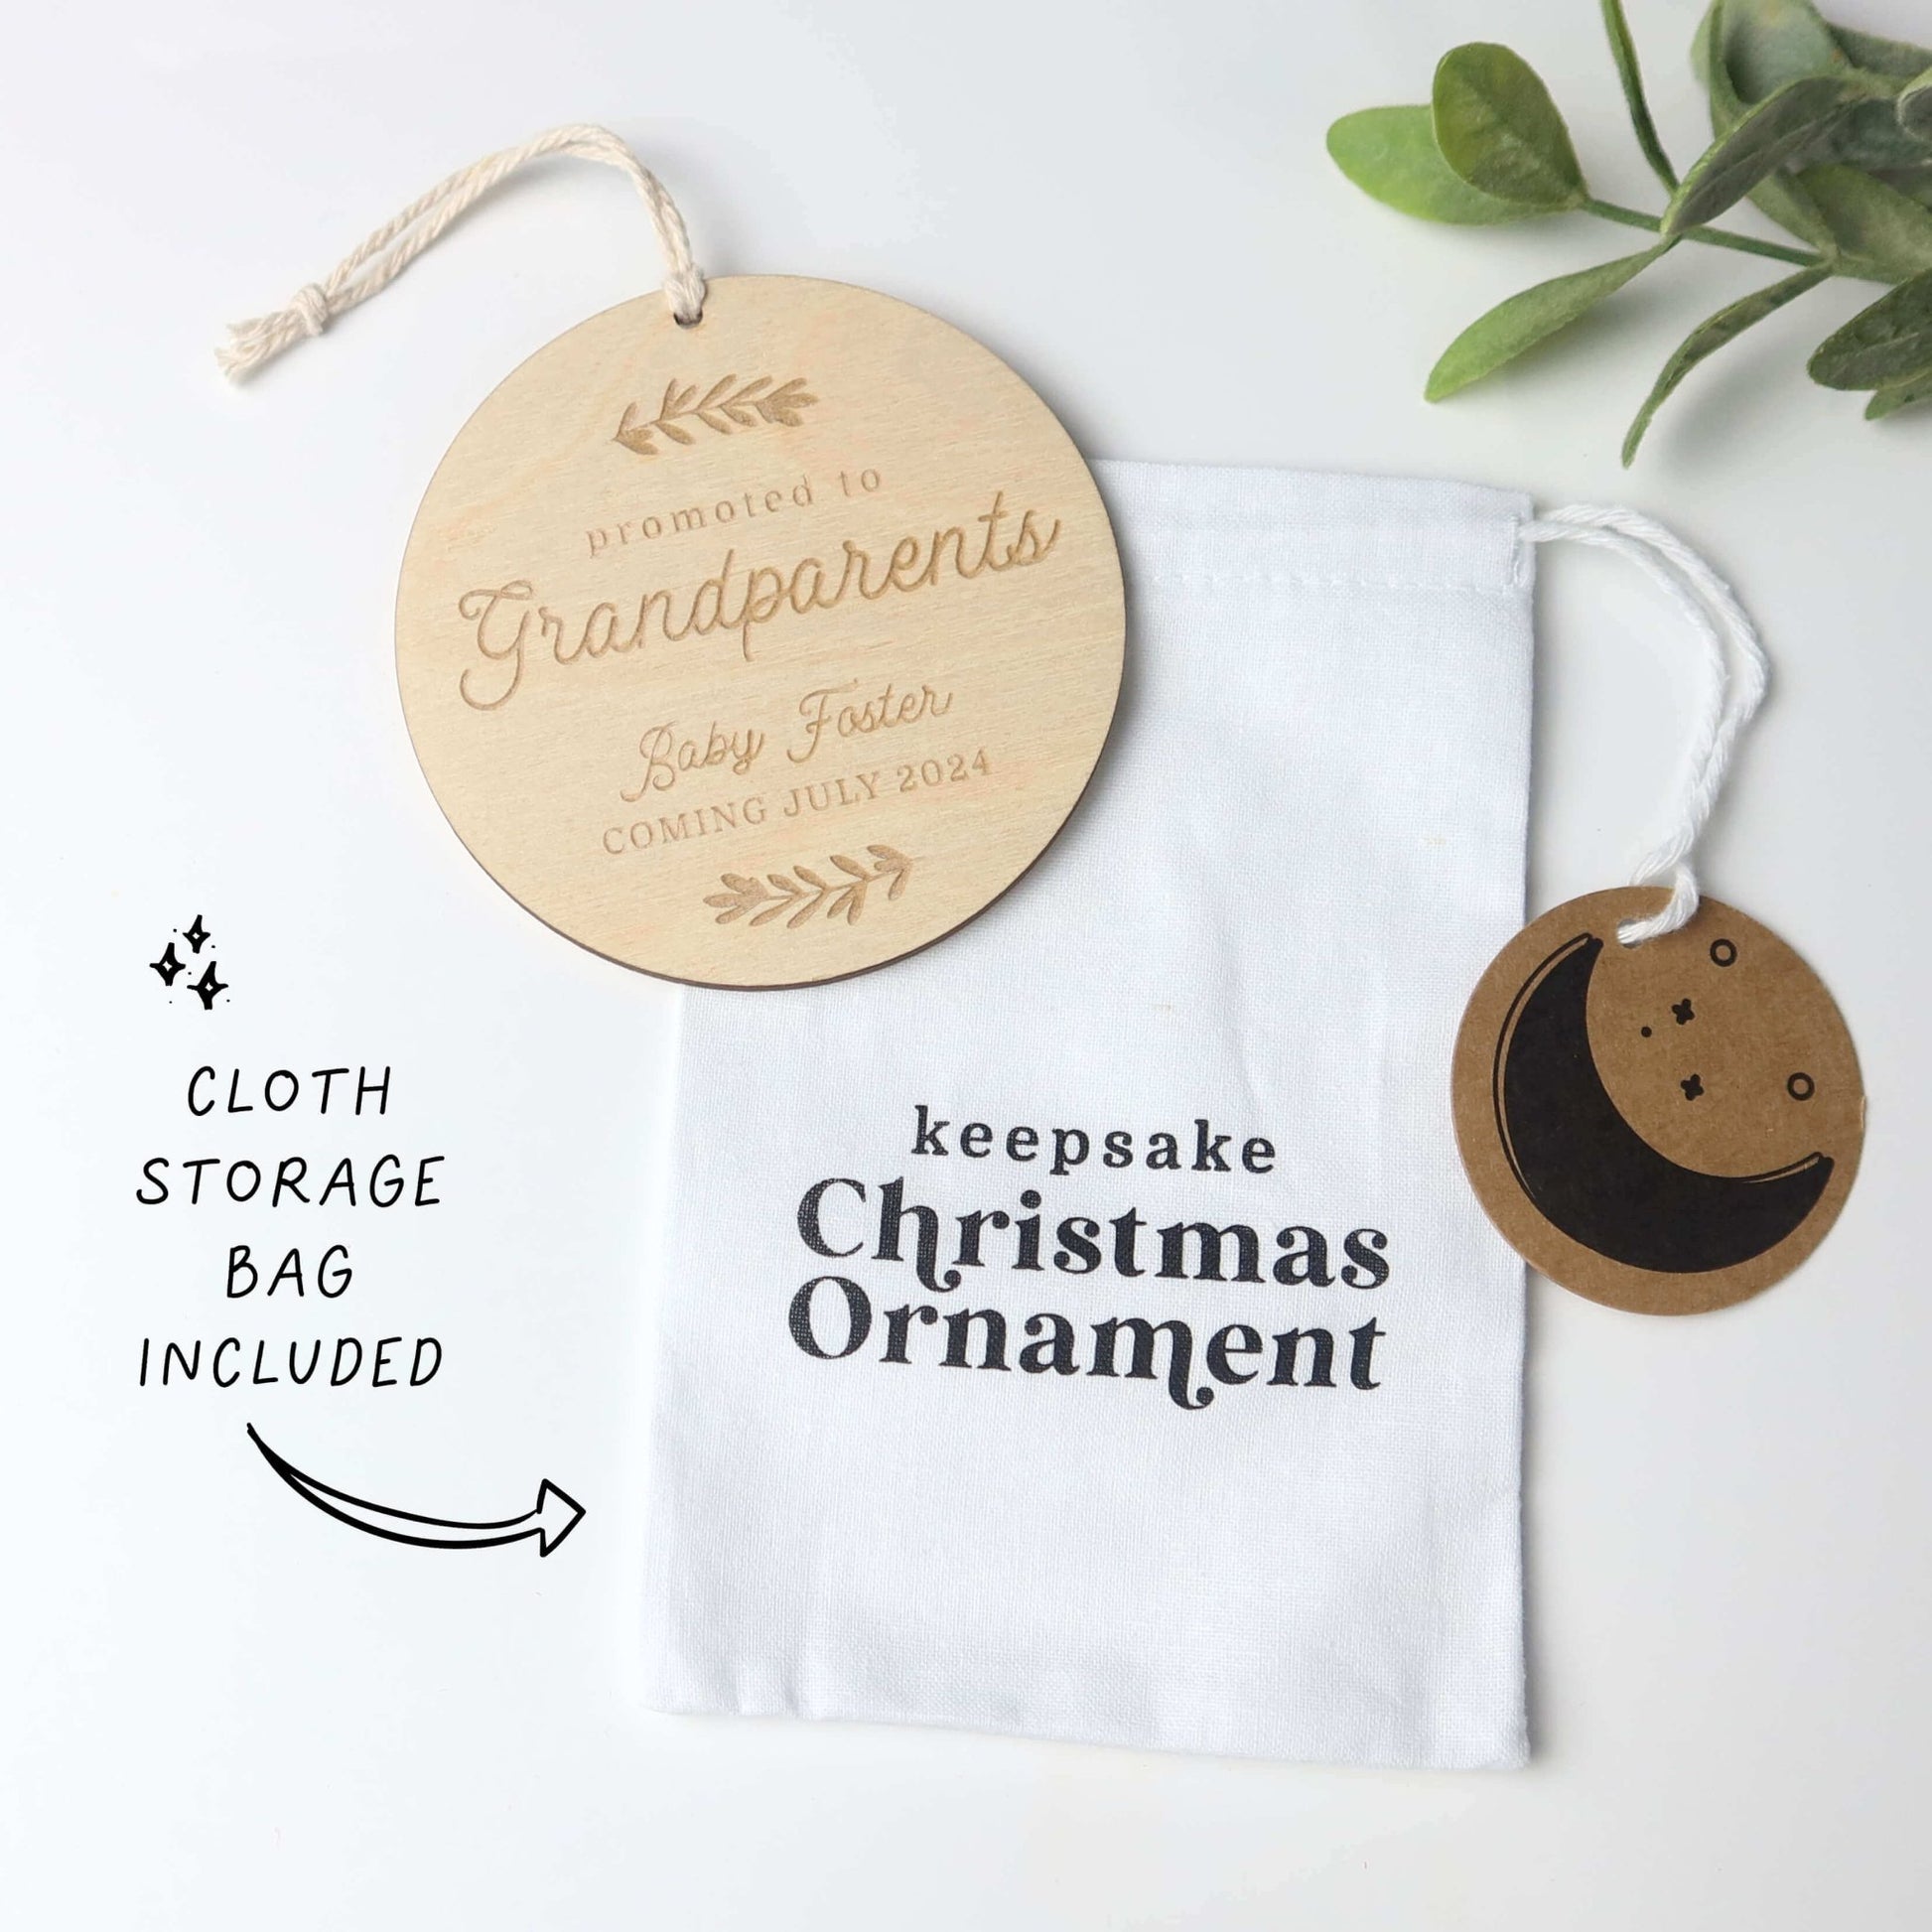 Promoted to Grandparents Pregnancy Announcement Ornament - Holiday Ornaments - Moon Rock Prints